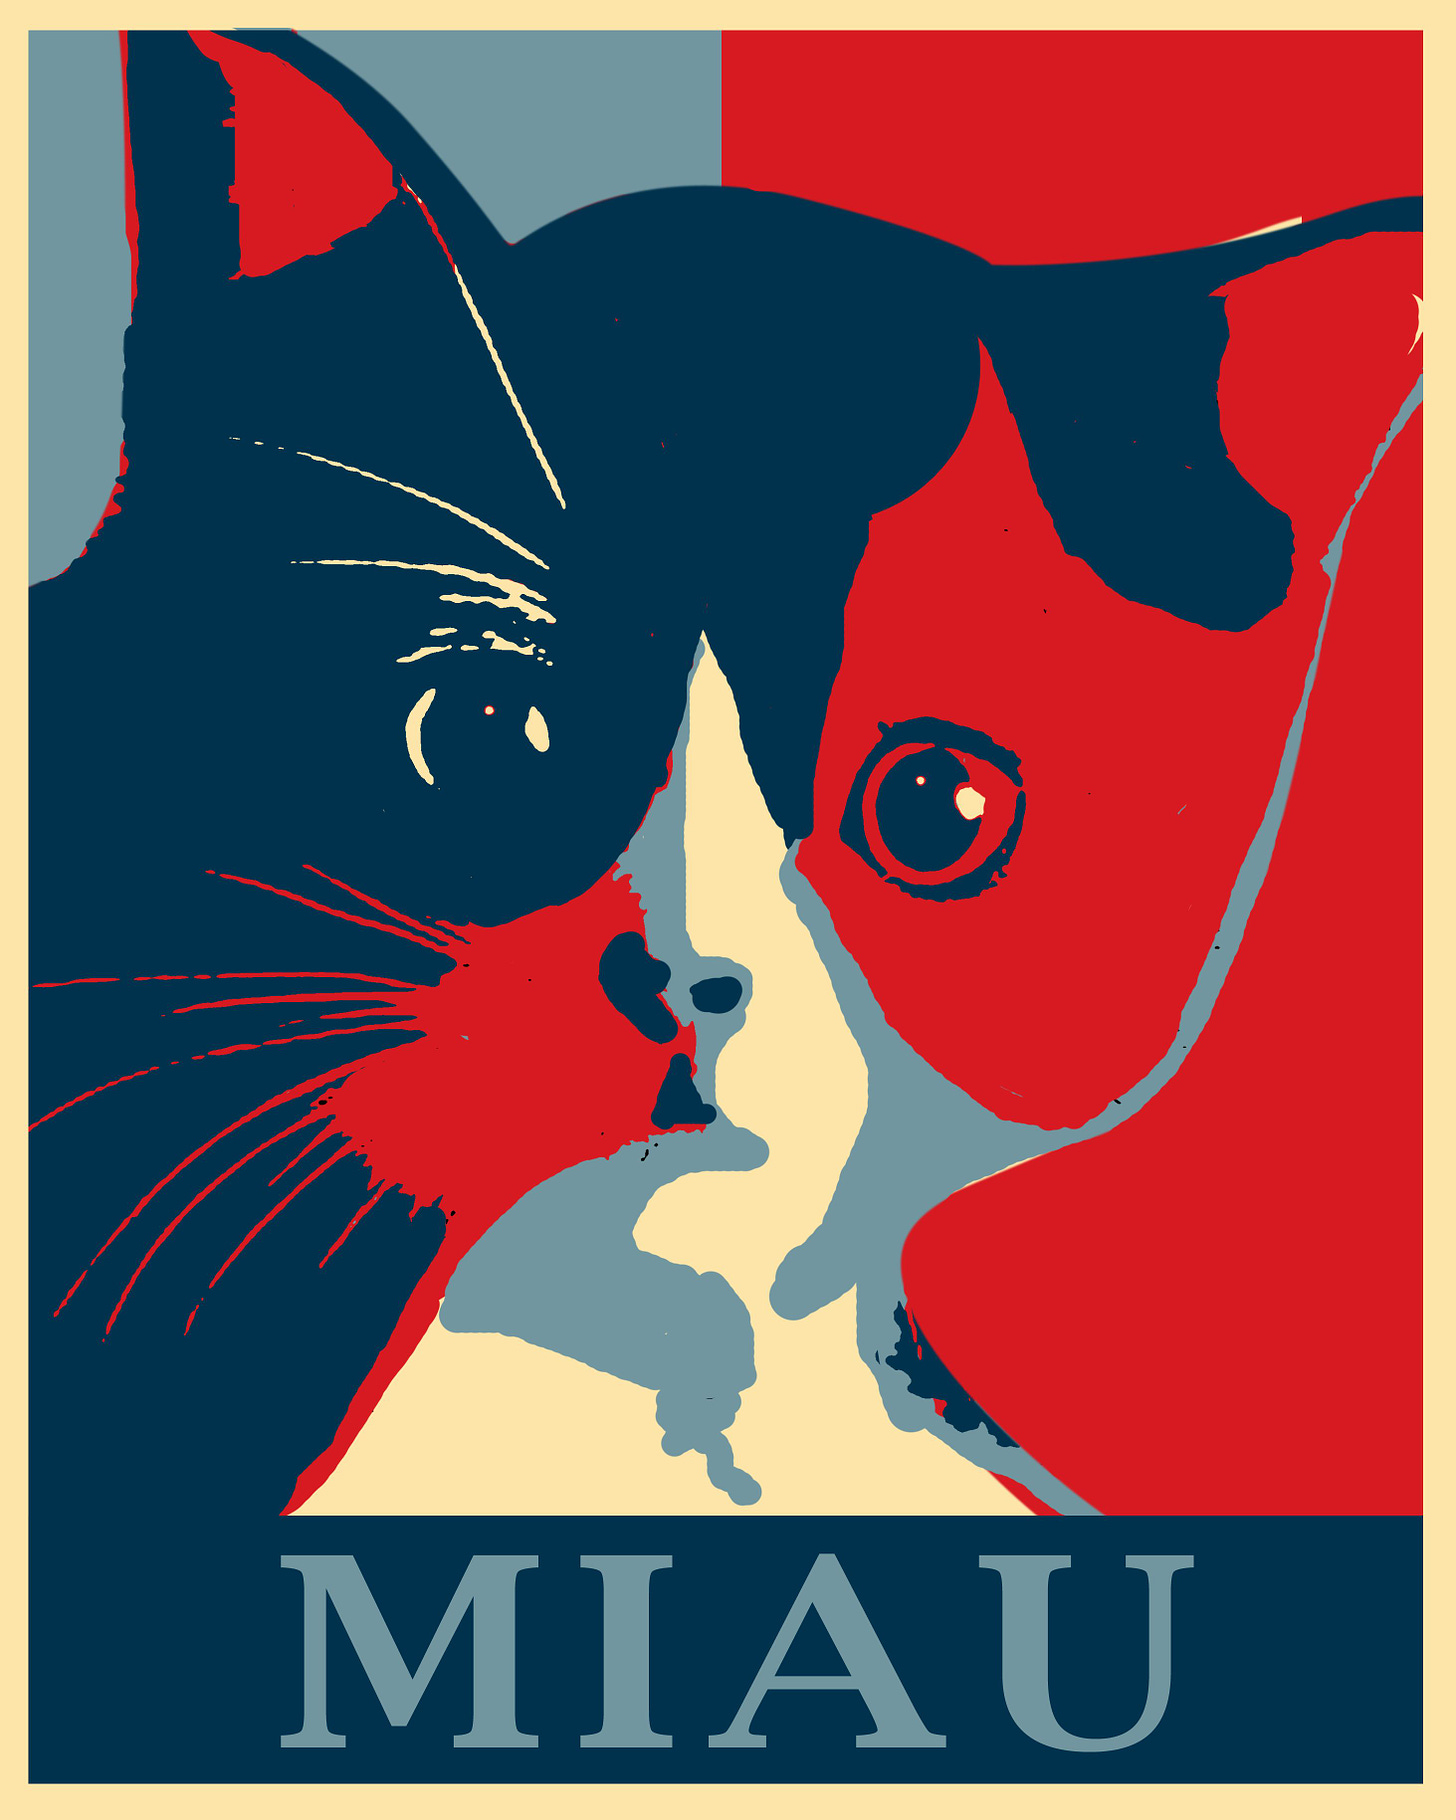 Get everything you need starting at $5 | Cat posters, Cat art, Matchbox art